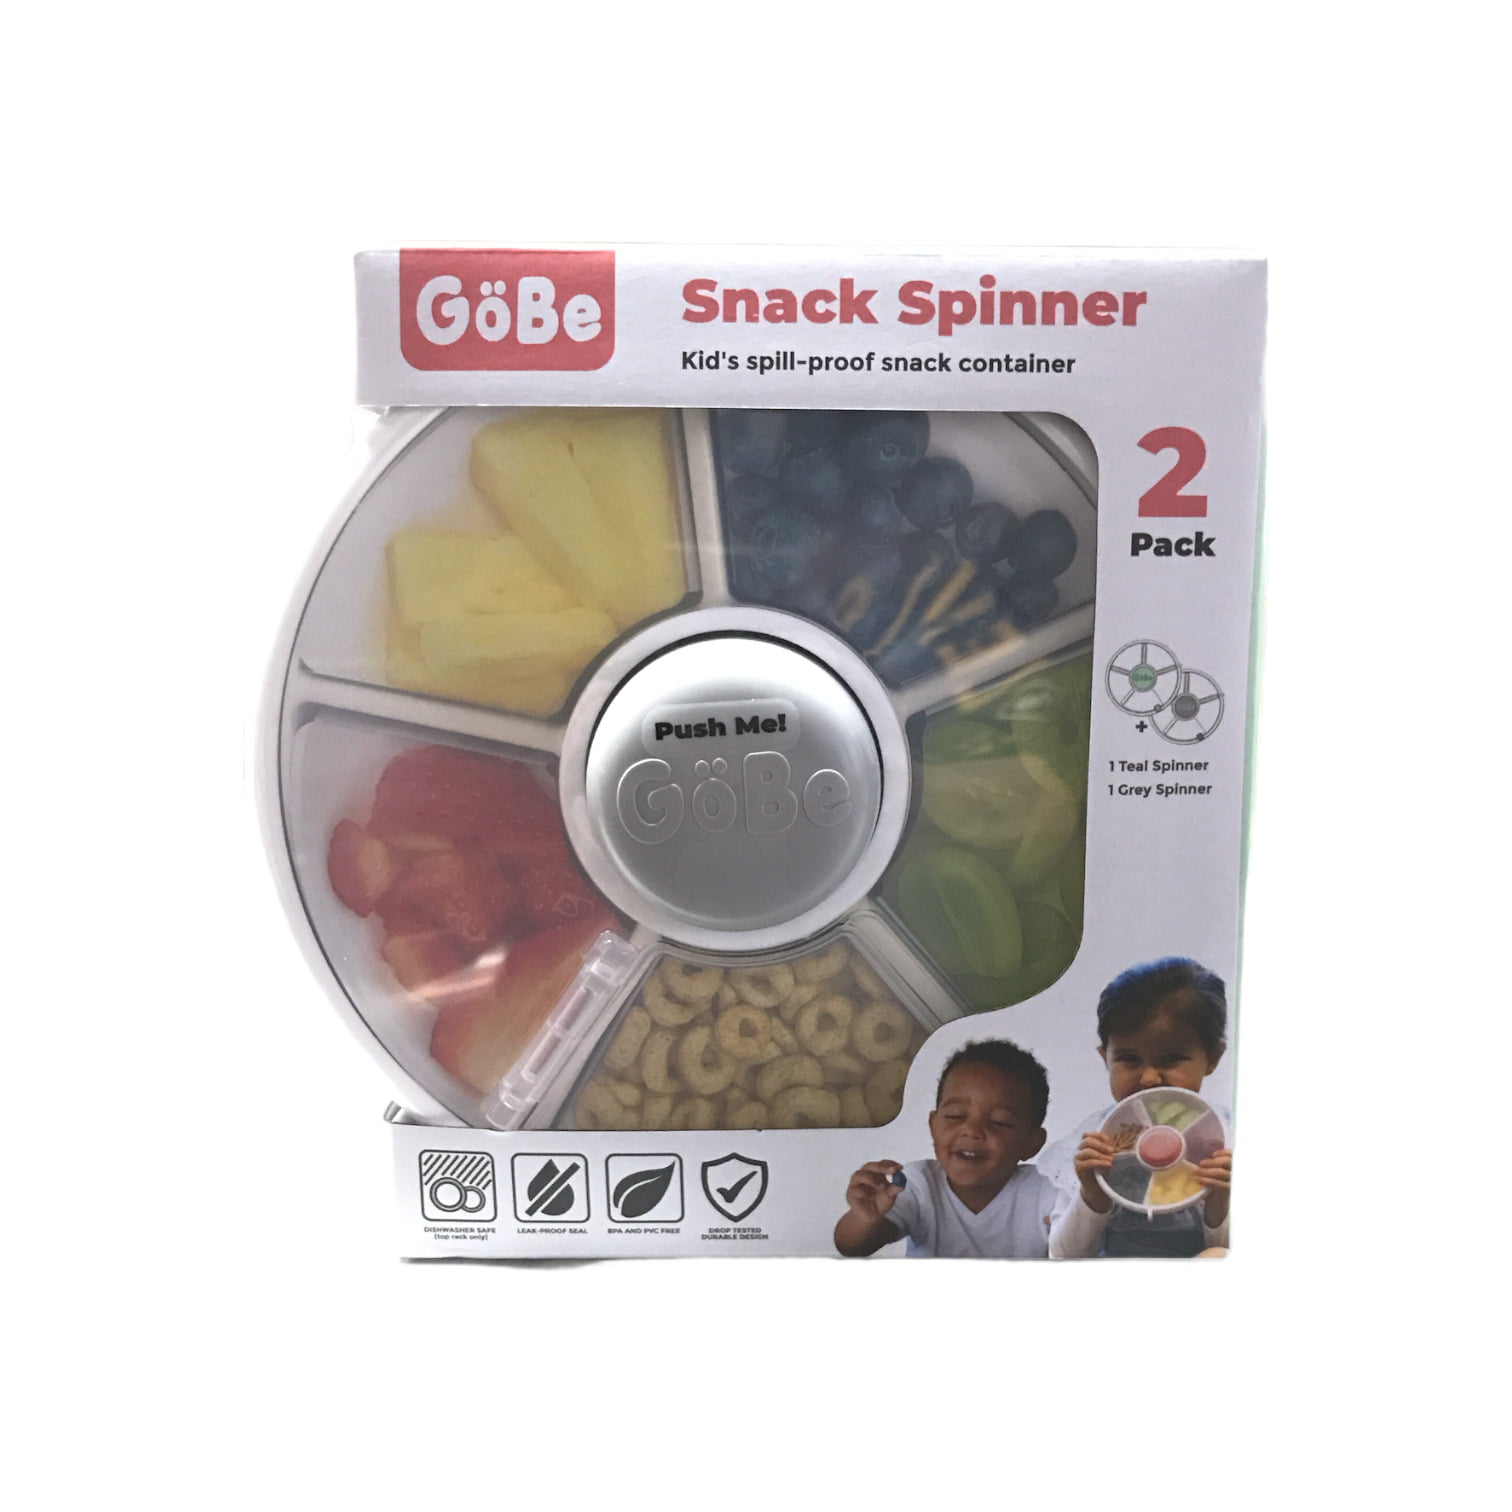 Gobe Snack Spinner 2-Pack- Teal/Coral